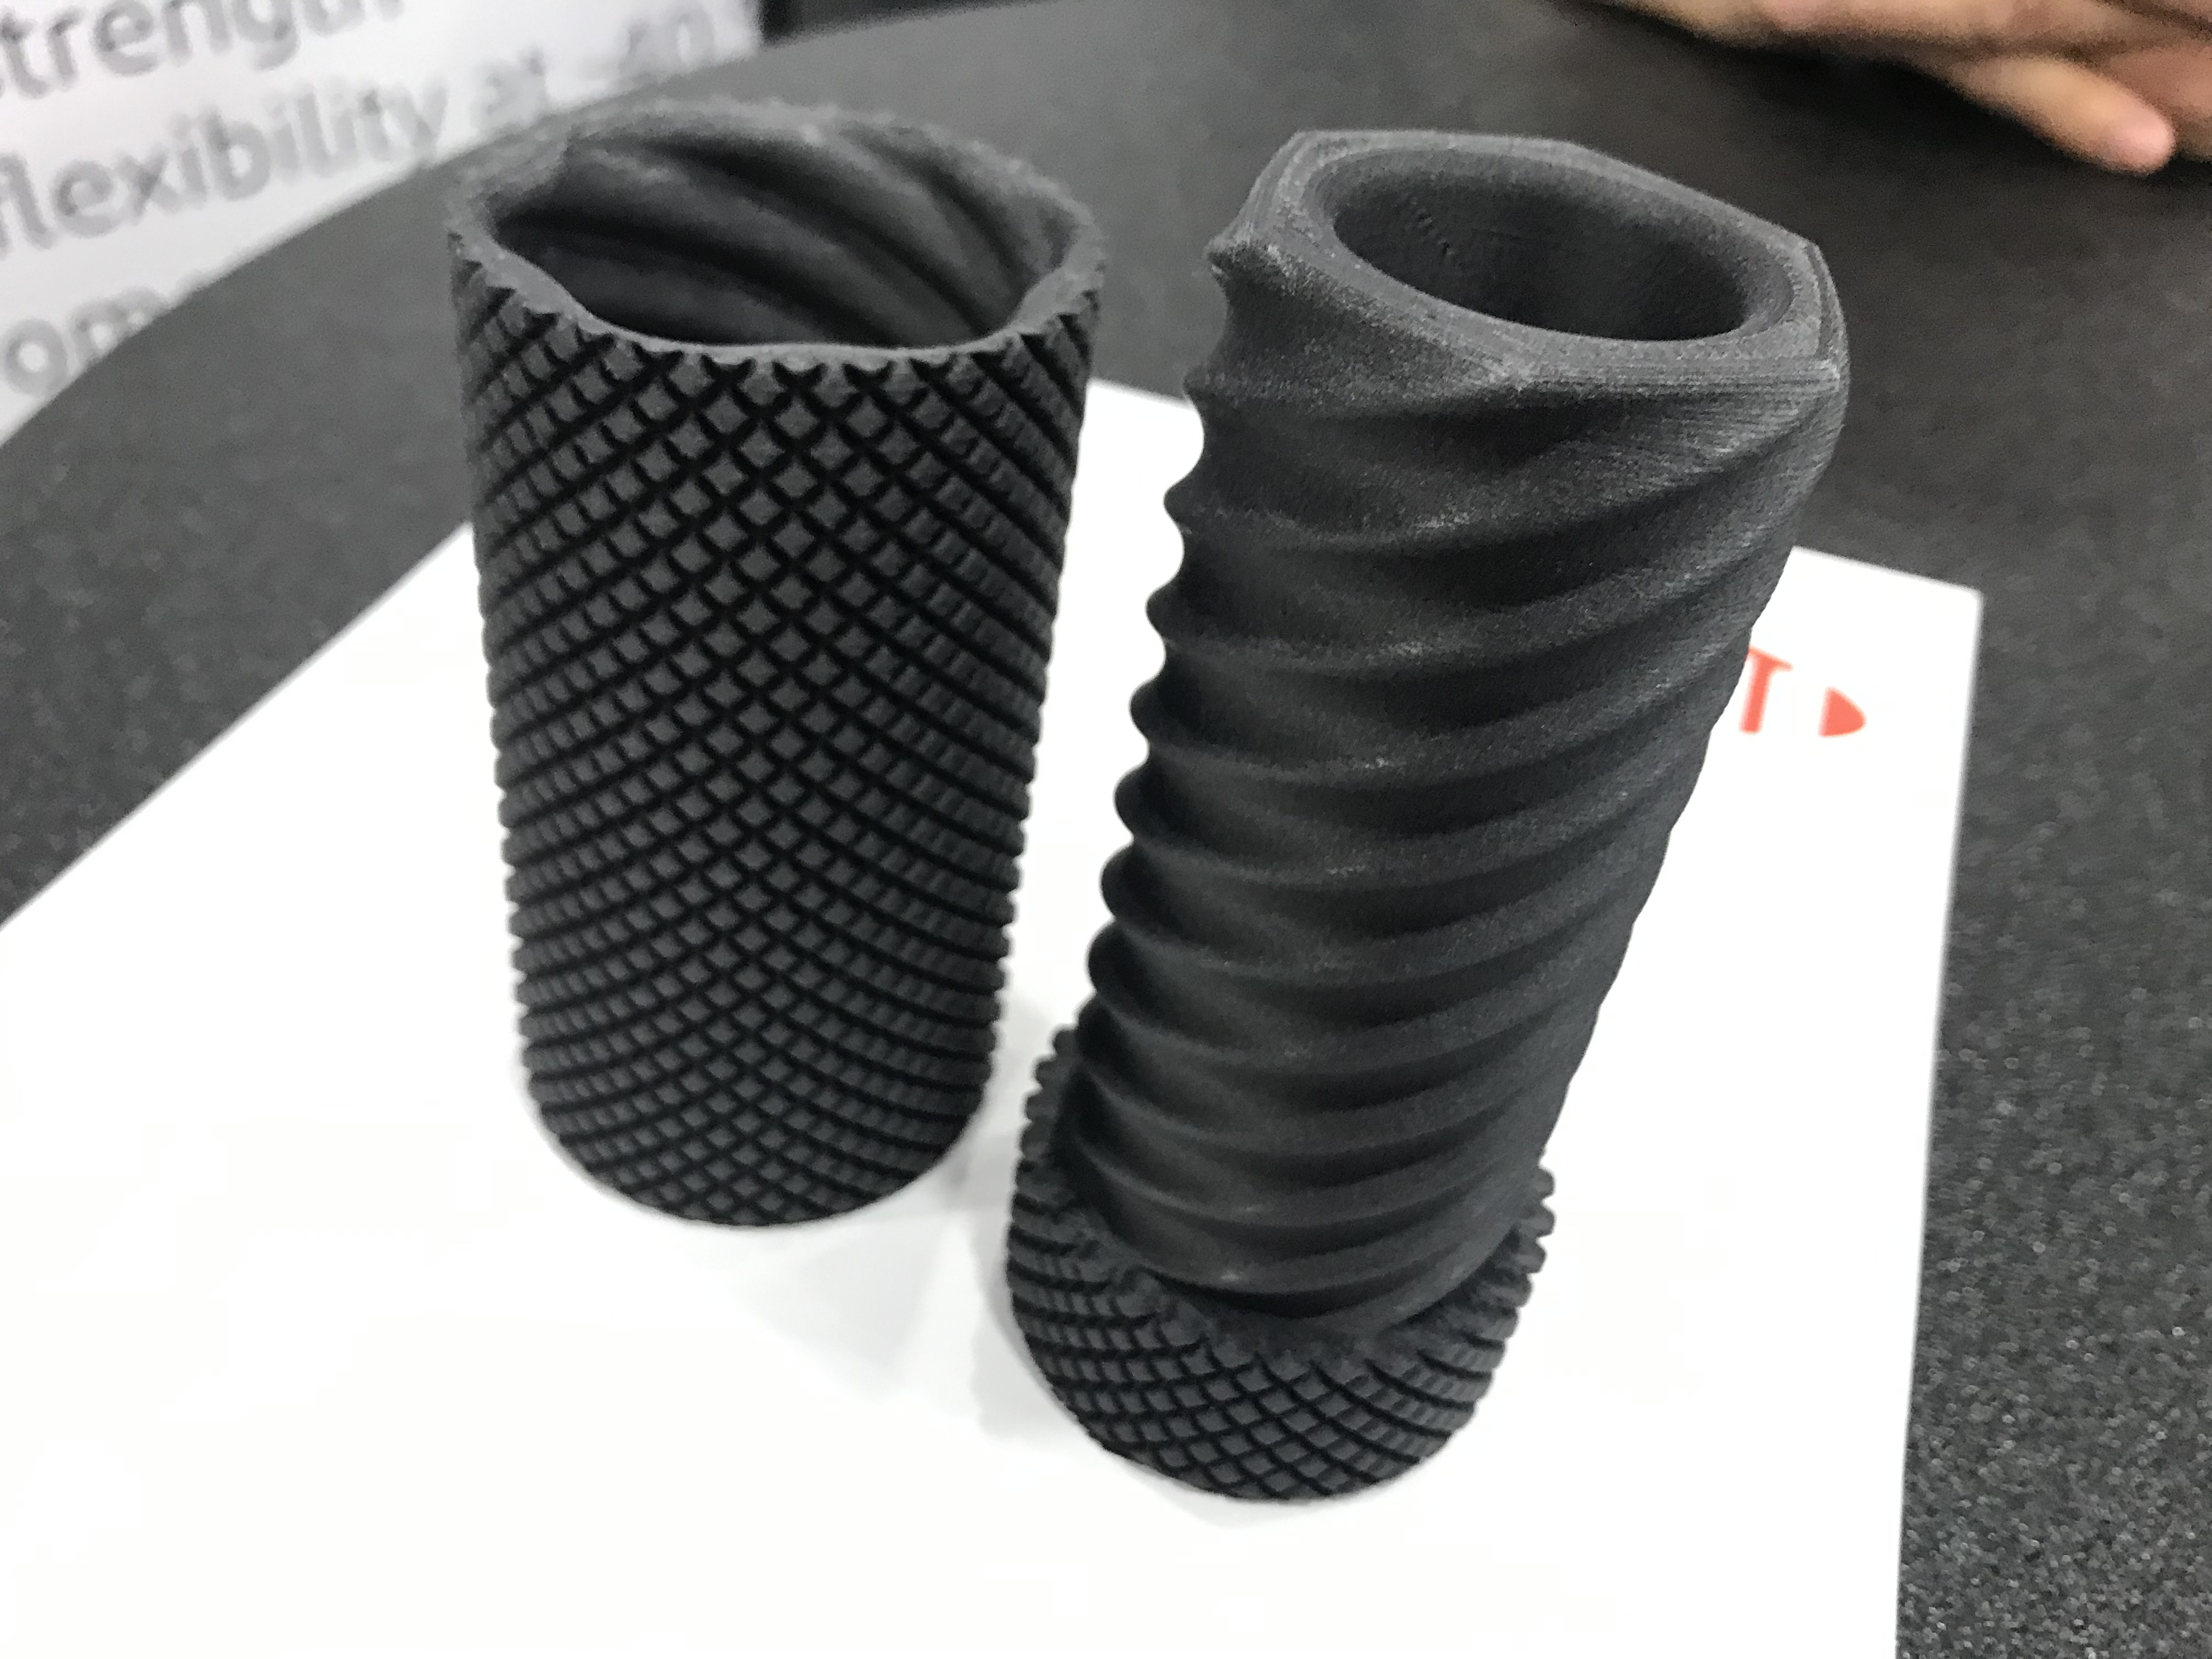 Sample 3D print using DuPont carbon fiber reinforced Zytel. Surface finish looks and feels similar to parts produced using SLS. Photo by Beau Jackson